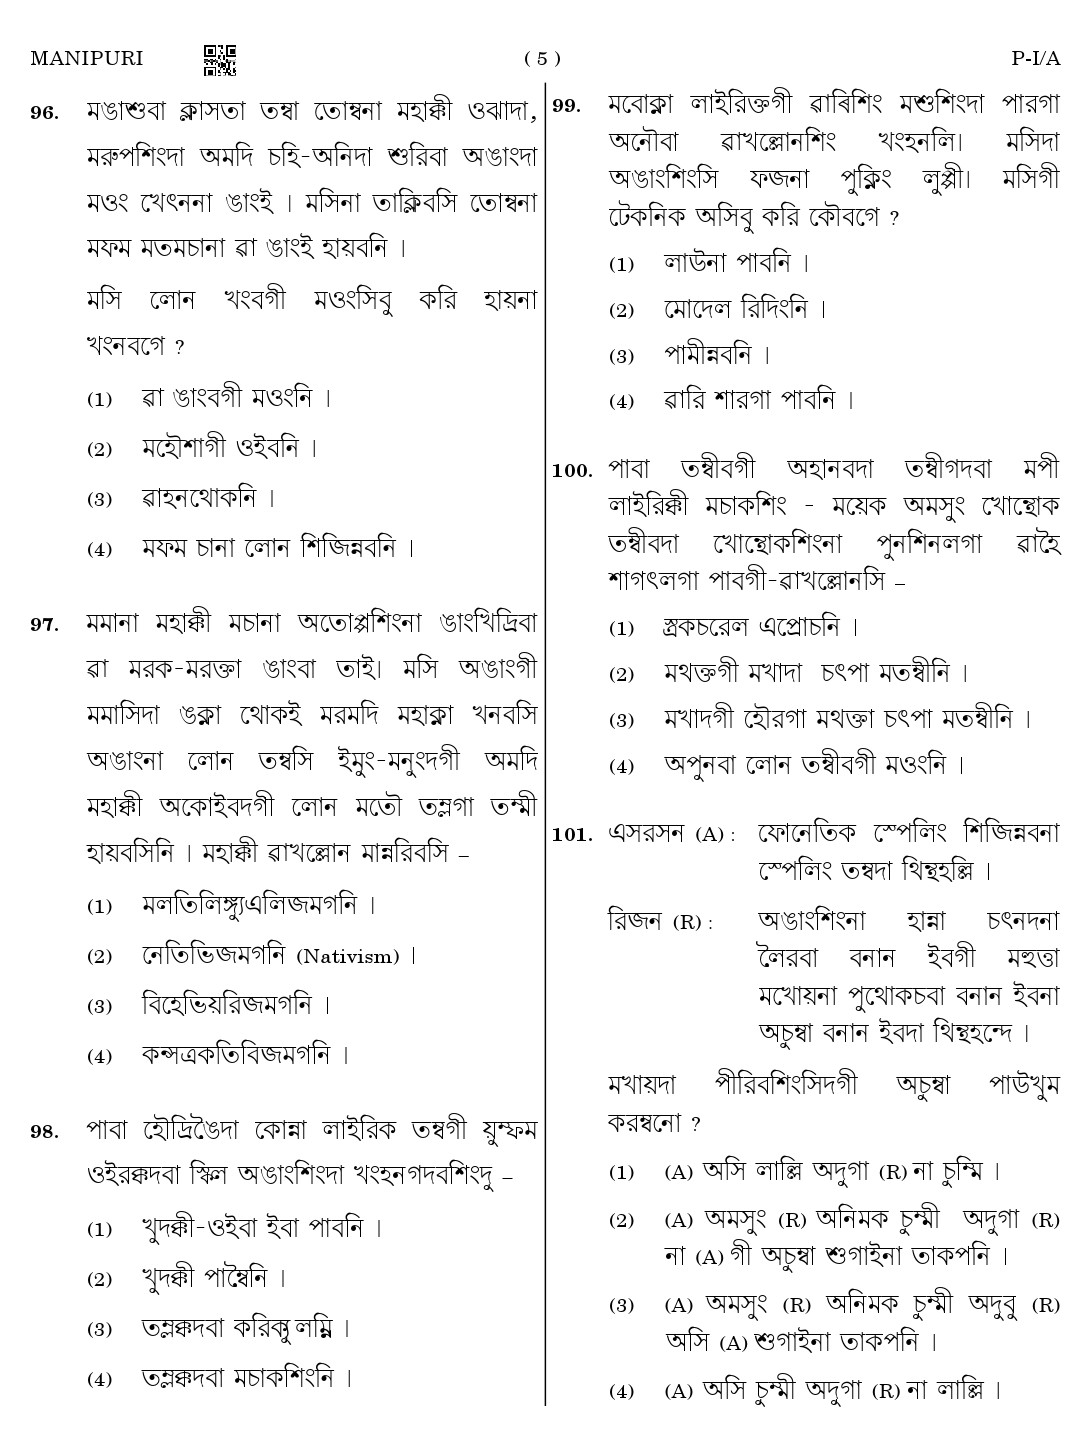 CTET August 2023 Manipuri Paper 1 Part IV and V 5